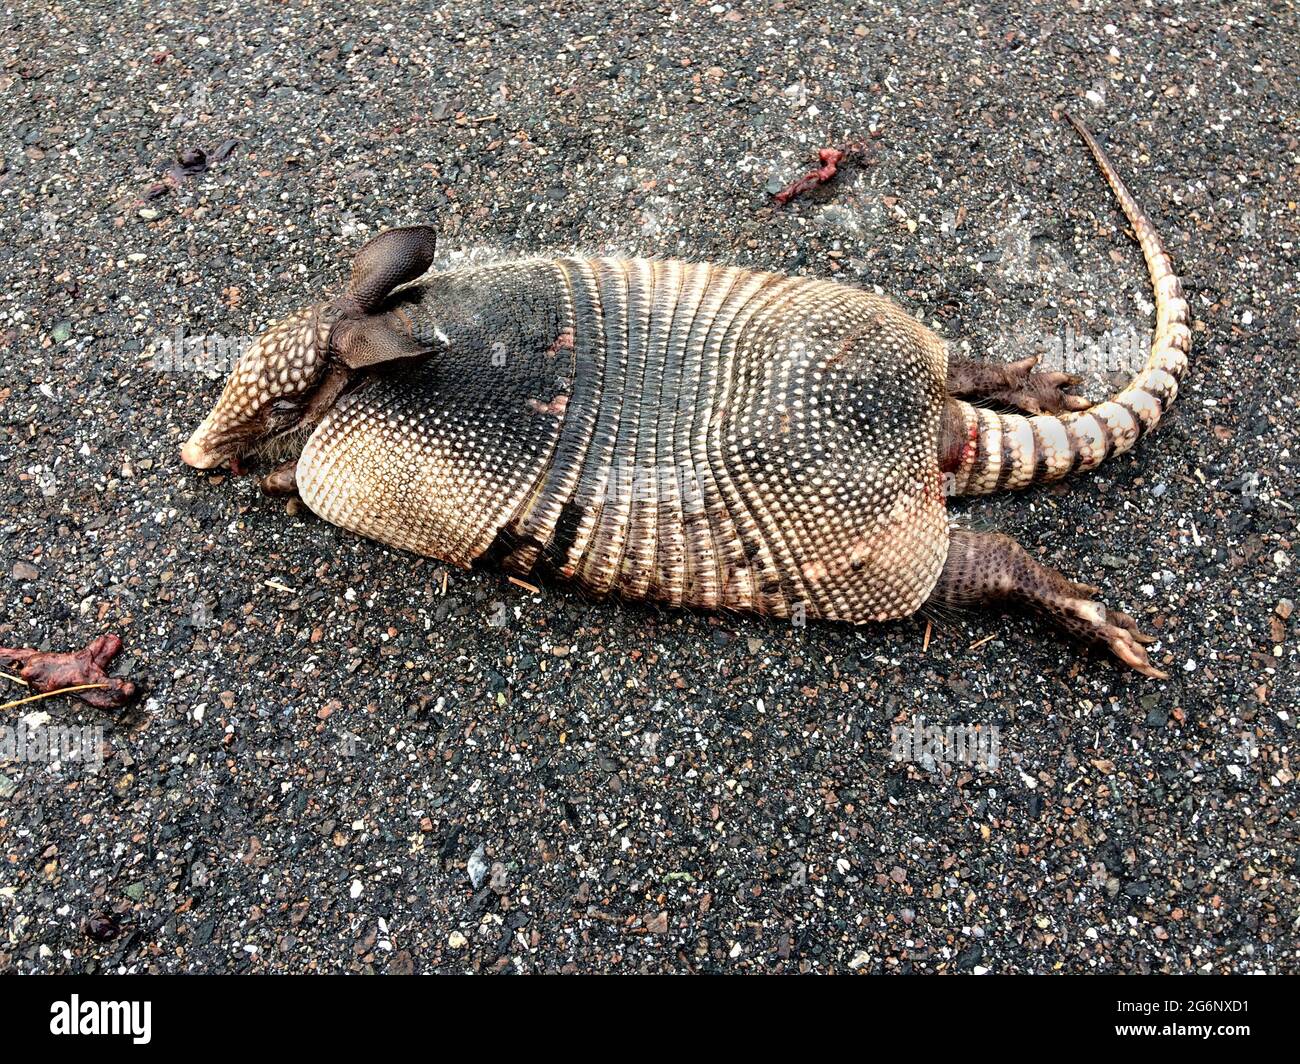 This young nine-banded armadillo (Dasypus novemcinctus) lies dead on a blacktop roadway in central Florida, USA. The armored mammal was a victim of its own unusual characteristic of leaping several feet into the air when scared or startled -- the creature was killed when jumping into the underside of a moving vehicle that was straddling the little armadillo to avoid hitting it. Of the 20 species of armadillo that exist throughout the Americas, the nine-banded armadillo is the only one found in the U.S. This mostly nocturnal animal is common in Florida except for the Everglades and The Keys. Stock Photo